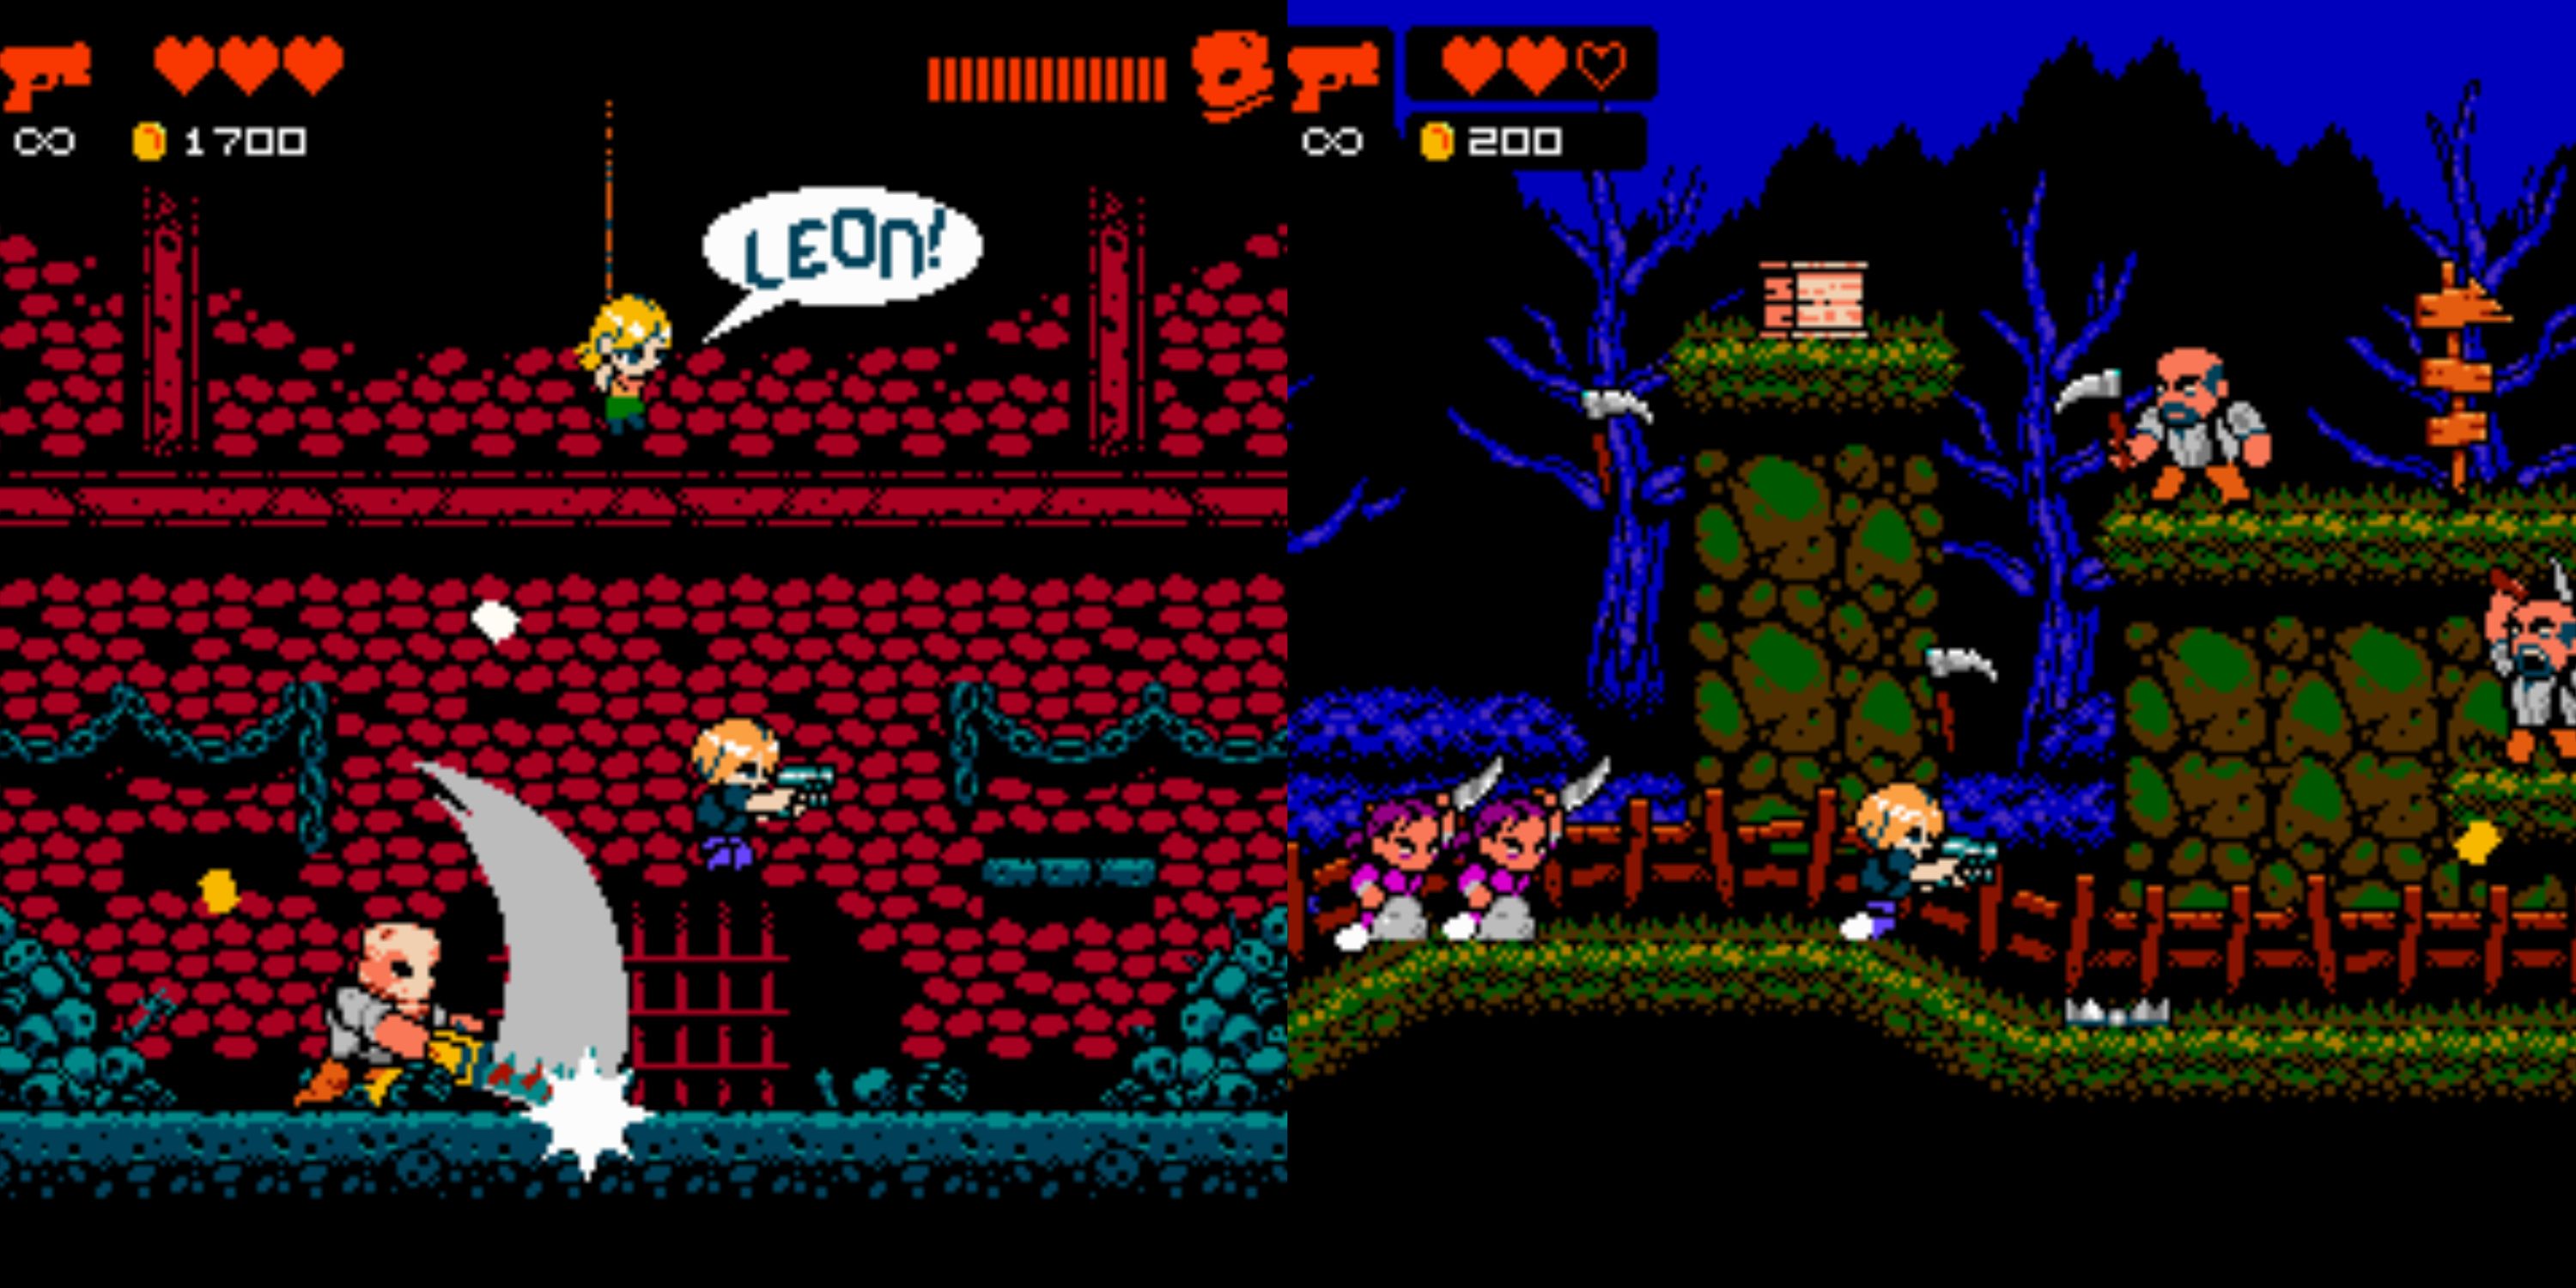 Leon fights off the chainsaw-wielding enemy to save Ashley and Leon fighting through throngs of villagers